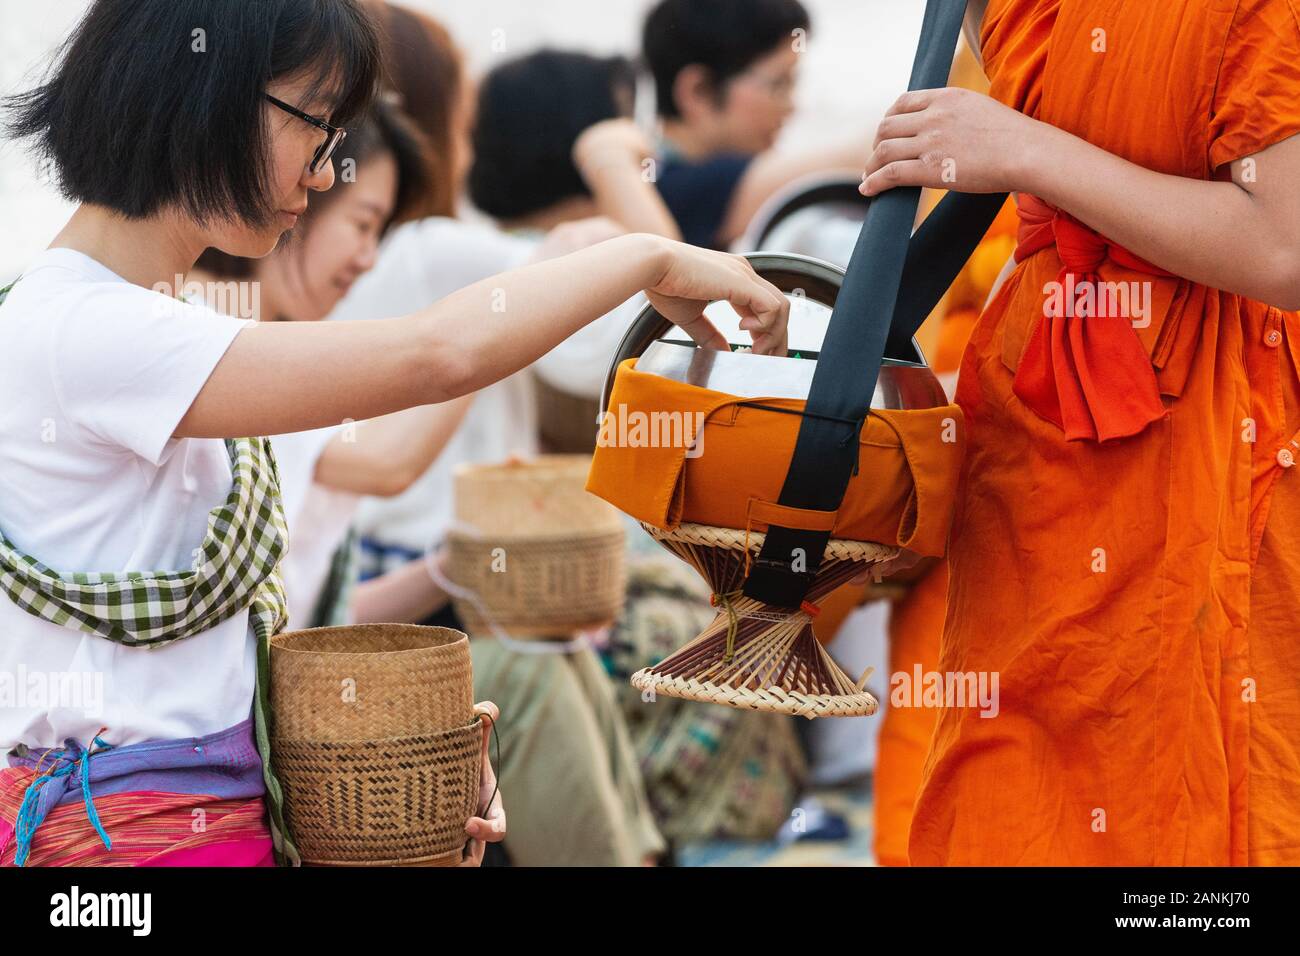 Luang Prabang, Laos - May 2019: Laotian woman making offerings to Buddhist monks during traditional morning alms giving ceremony Stock Photo